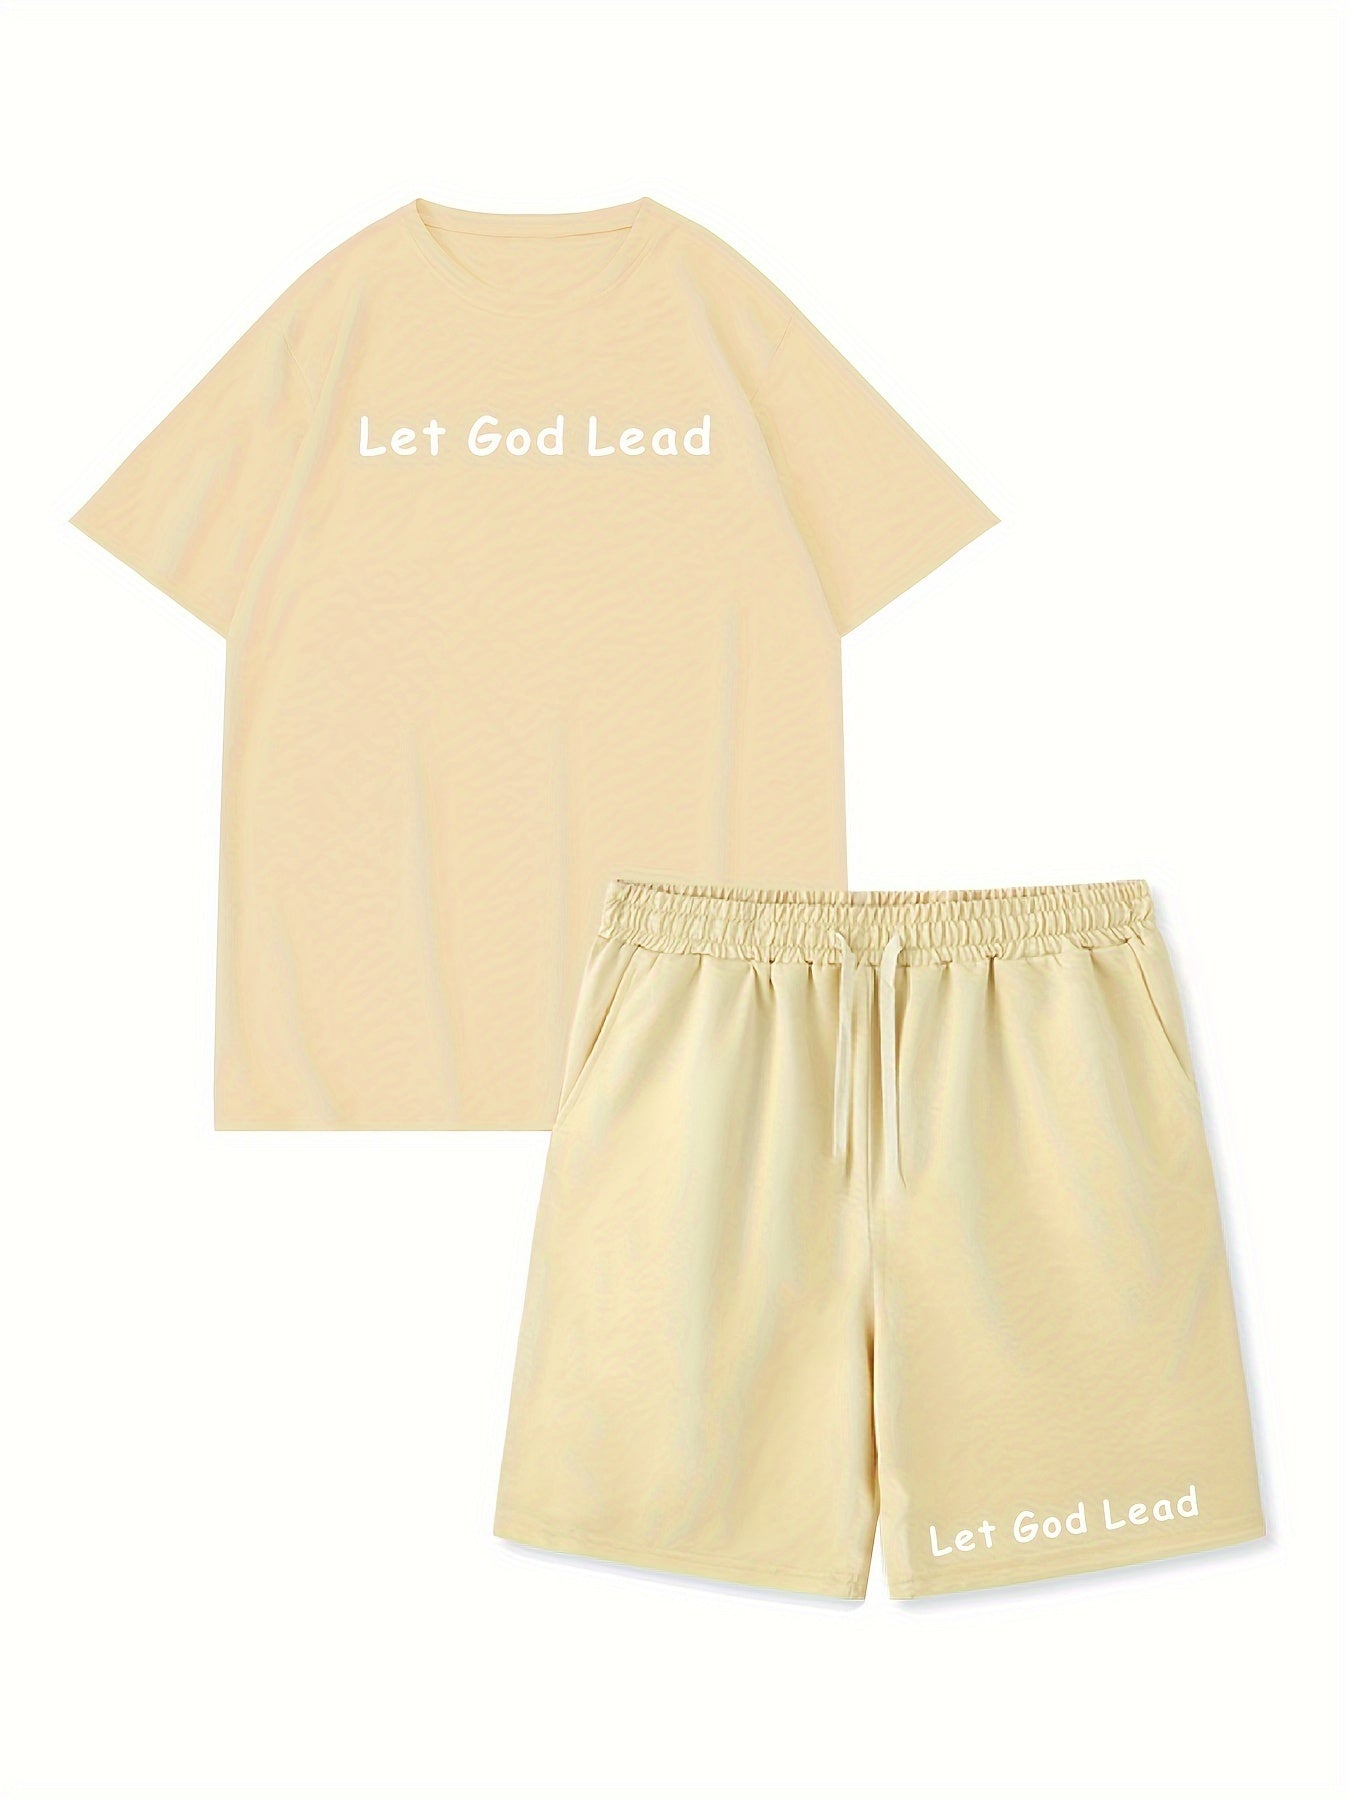 LET GOD LEAD Men's Christian Casual Outfit claimedbygoddesigns